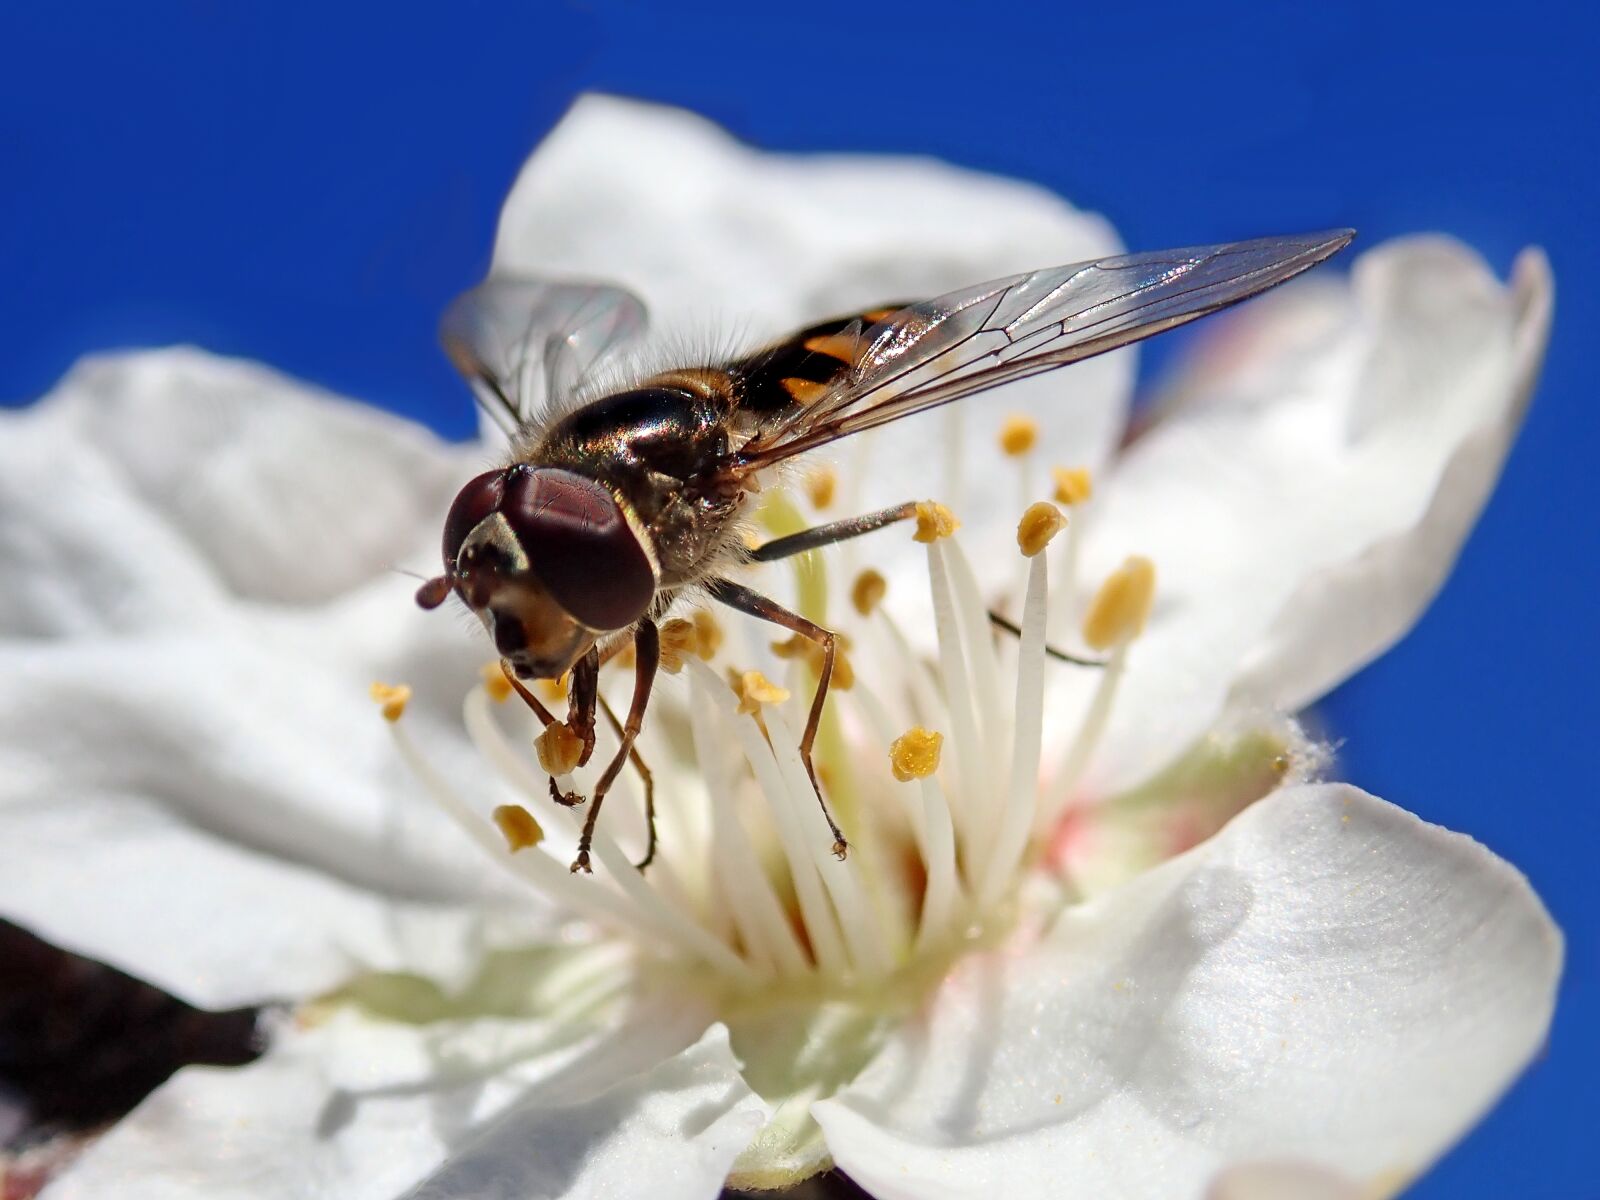 Olympus TG-5 sample photo. Insect, hoverfly, nectar photography